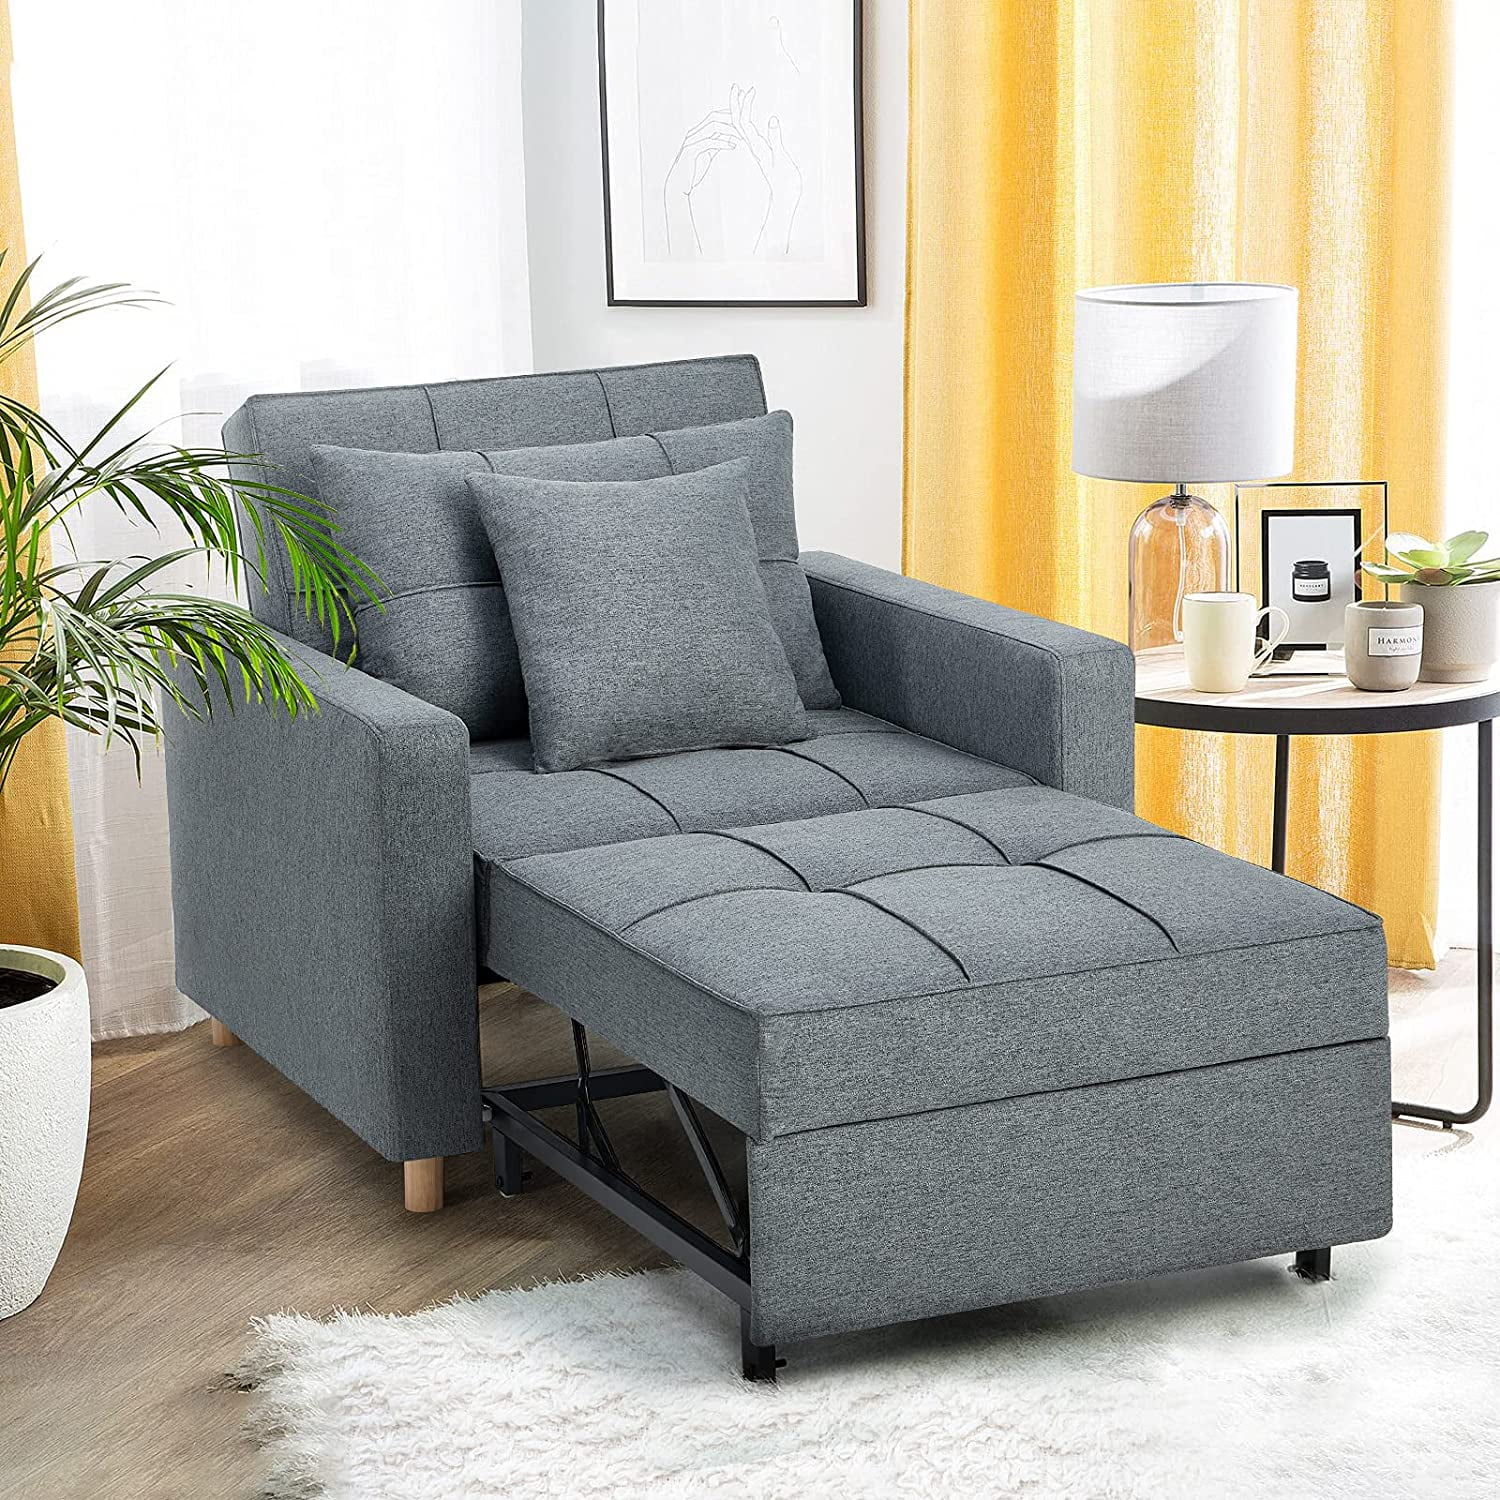 YODOLLA 3-in-1 Futon Sofa Bed Chair with Adjustable Backrest Into a